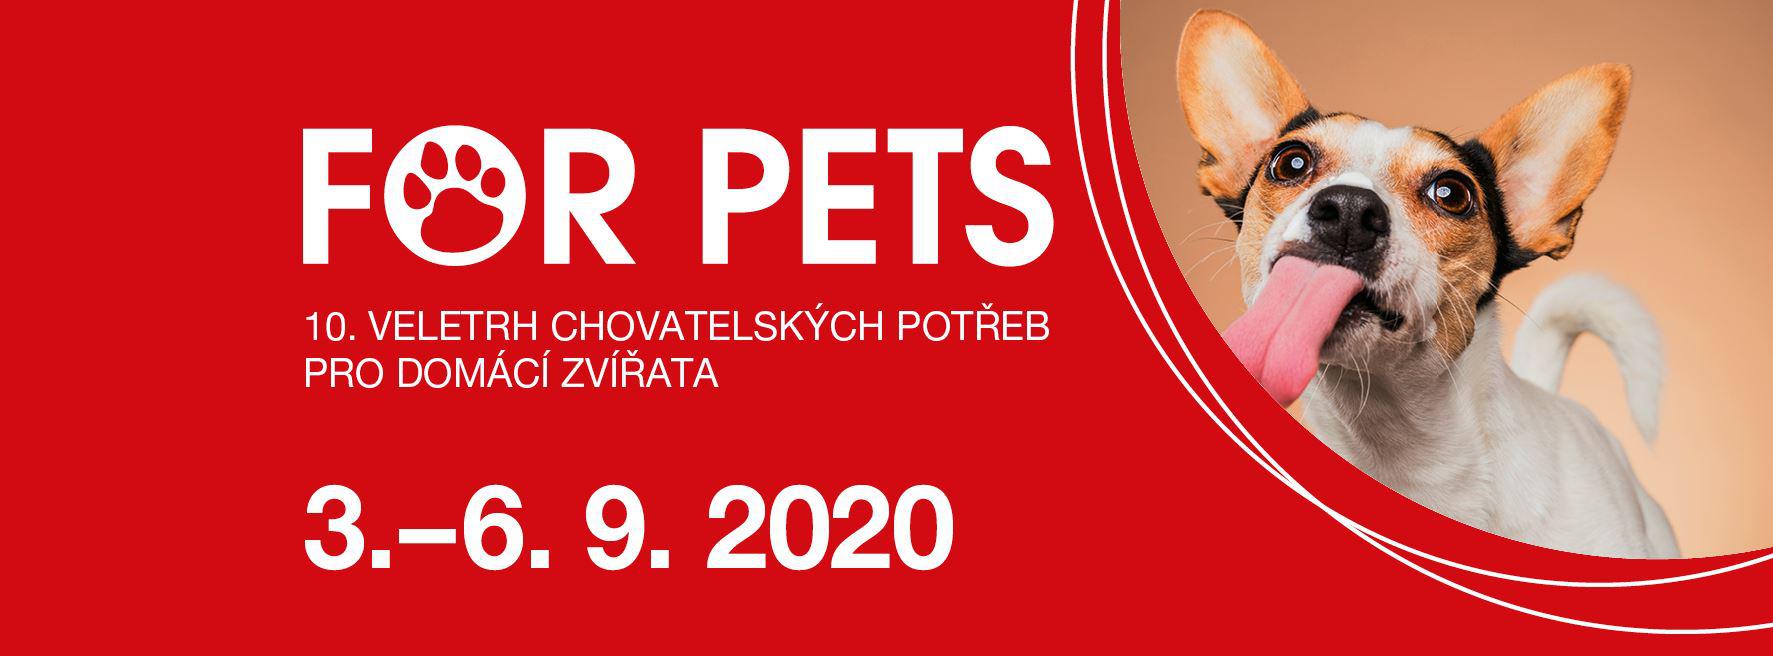 For Pets - 3. - 6. z 2020